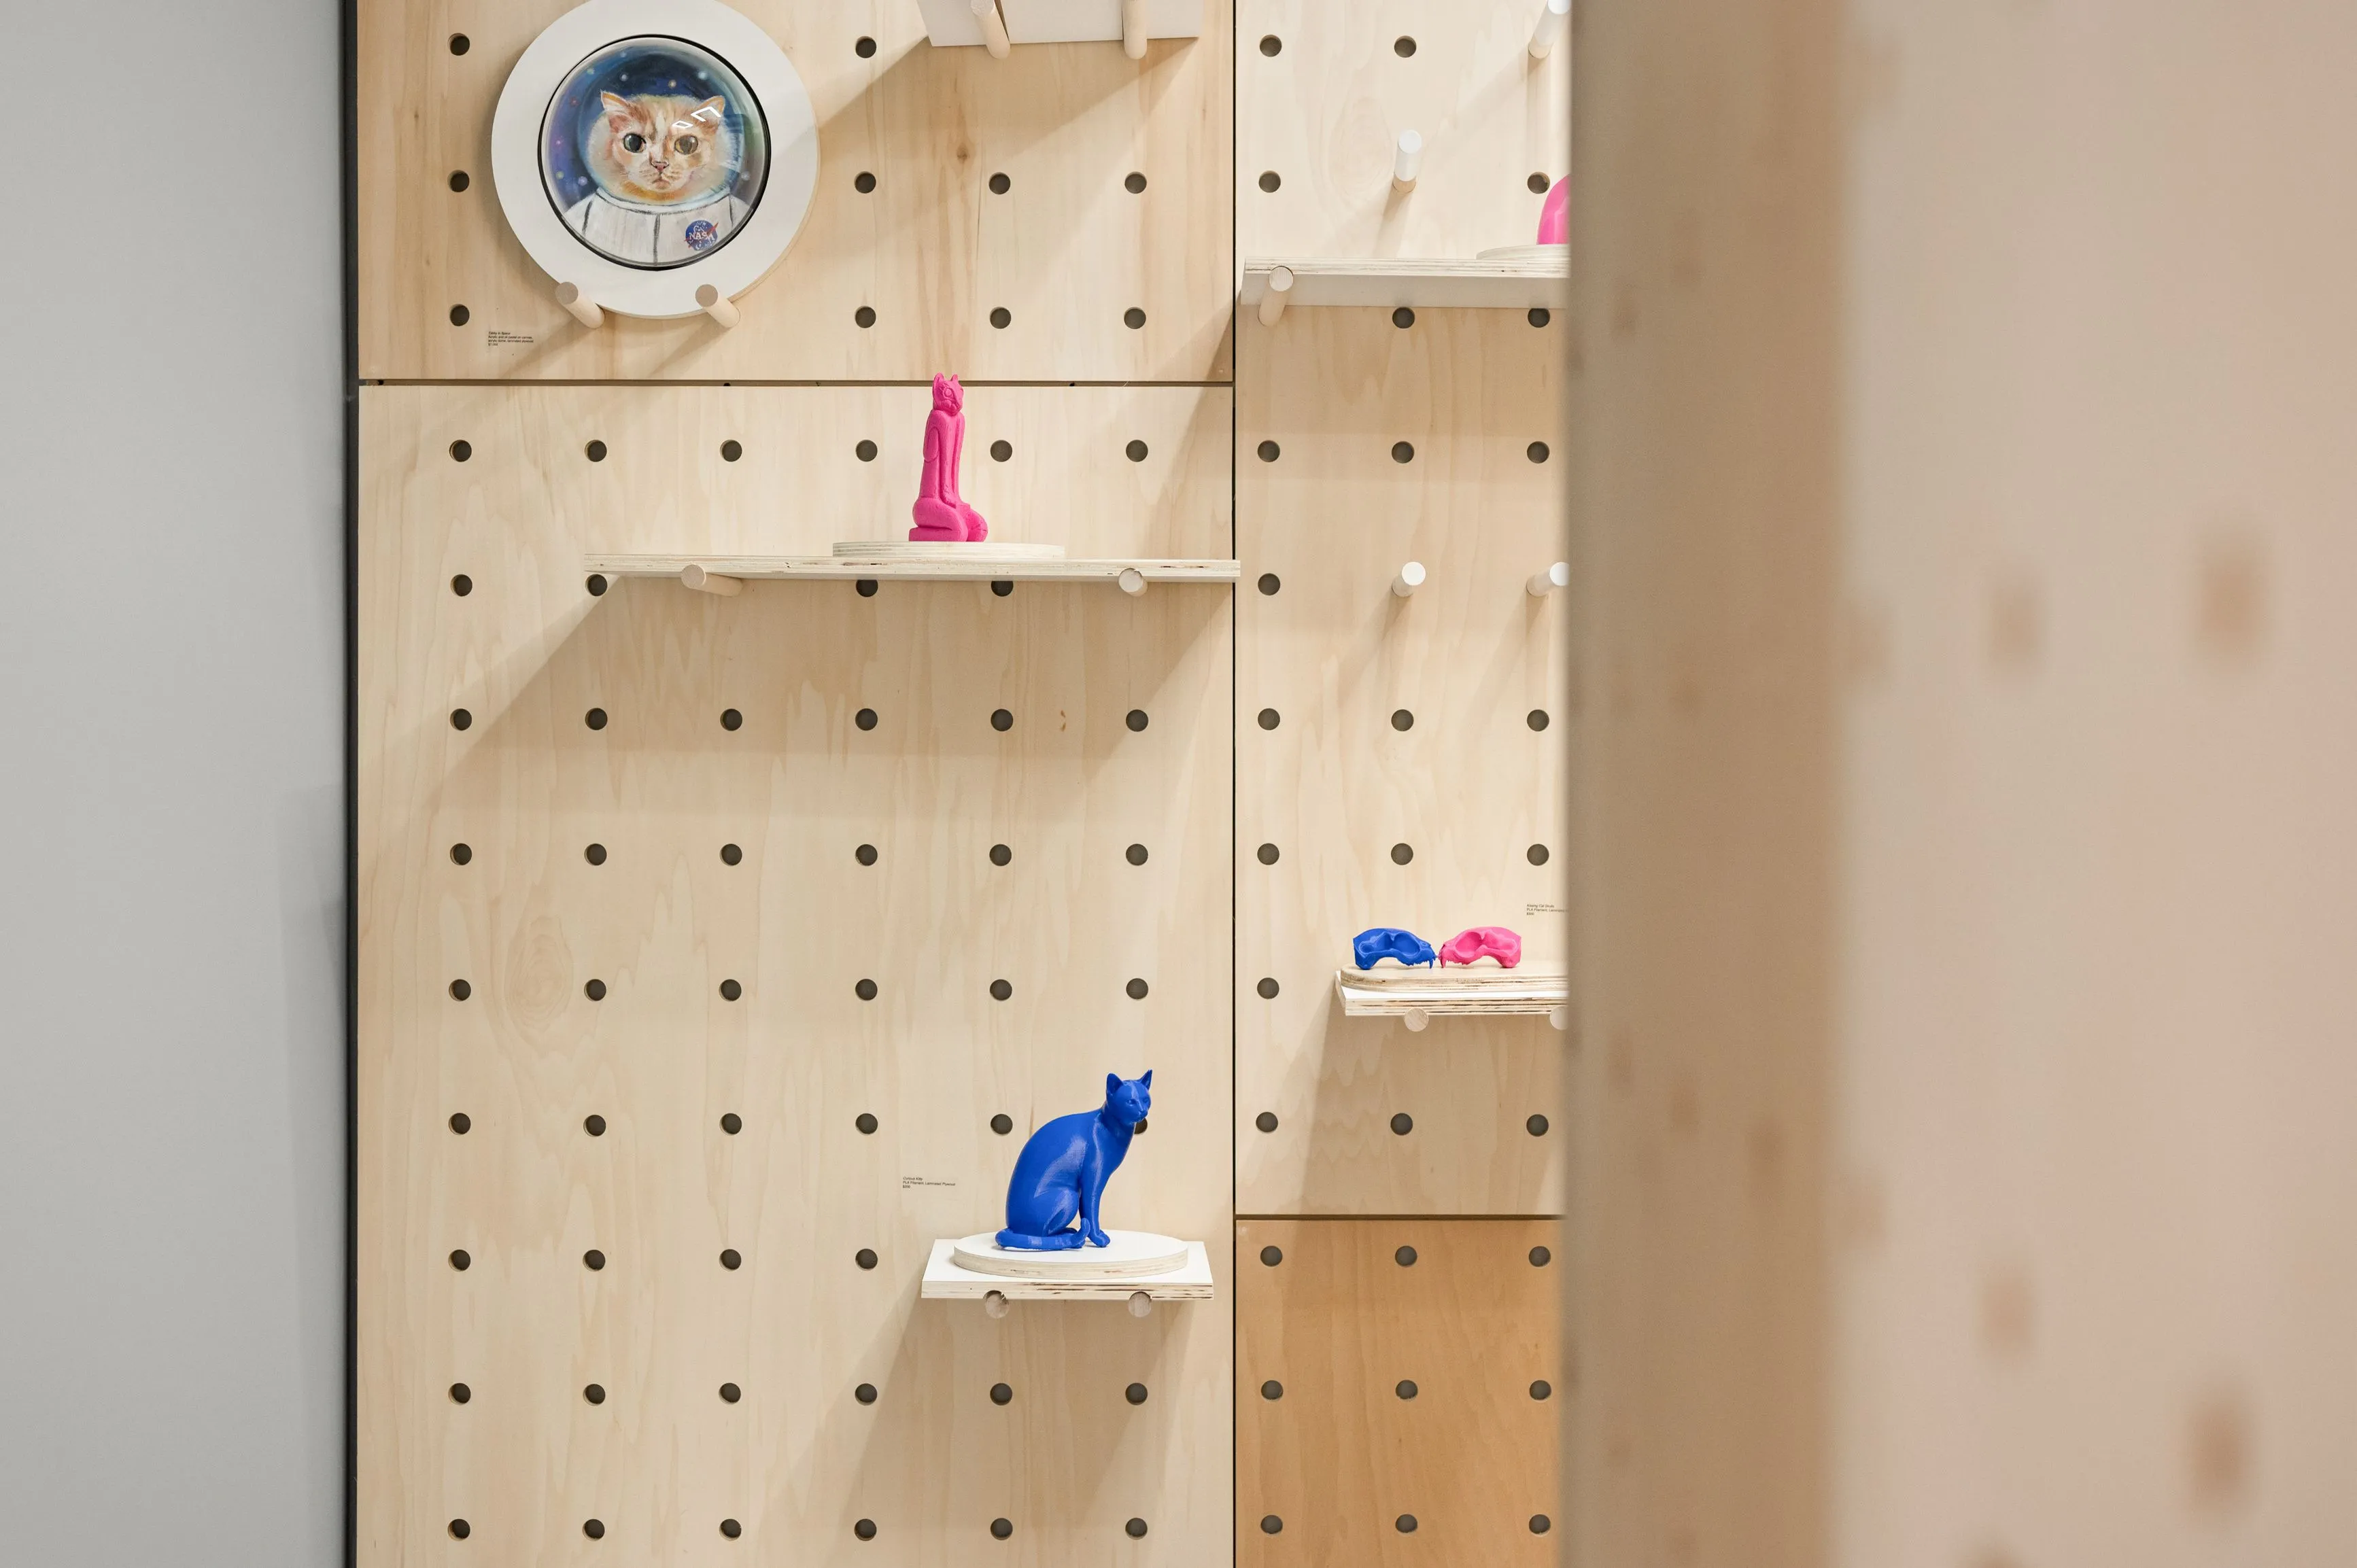 Interior view of a pegboard storage wall with a few items on the shelves, including a clock, small figurines, and a plant pot.